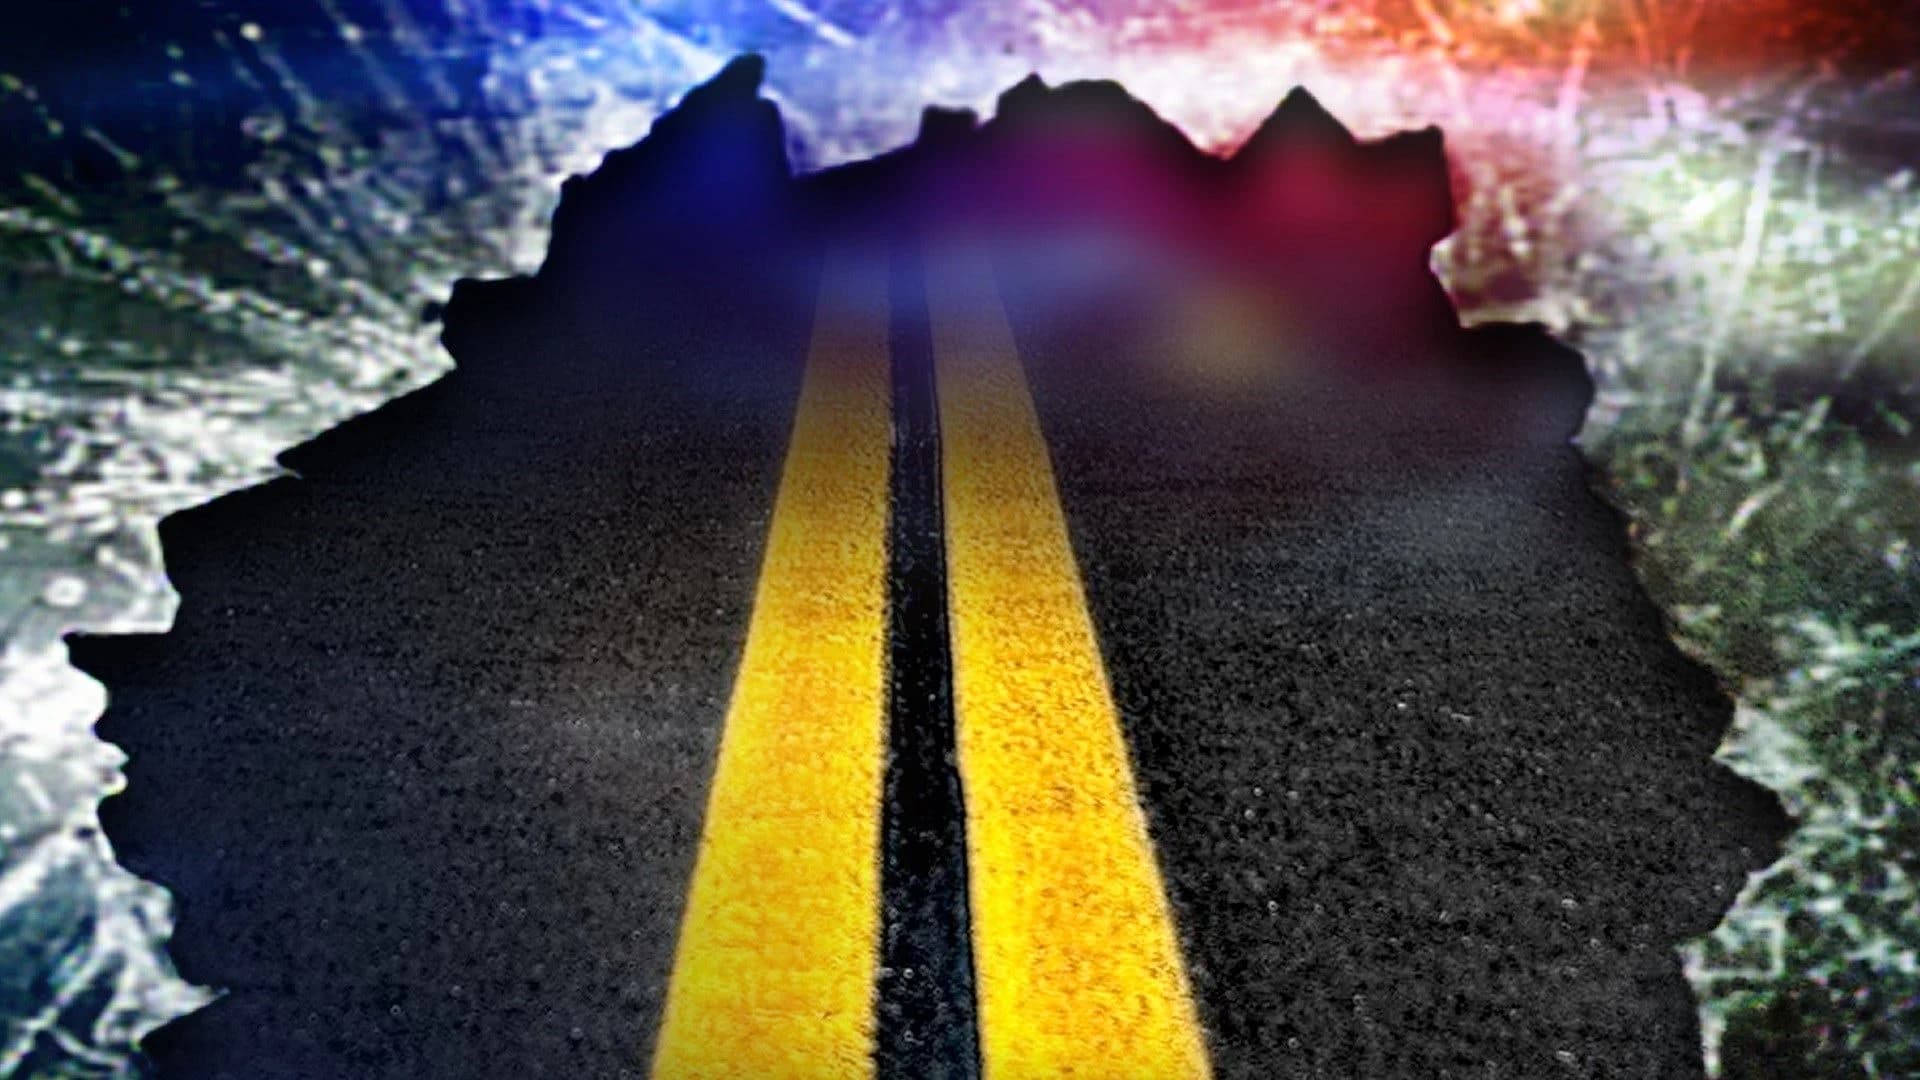 State police: Man fatally struck on highway after exiting car